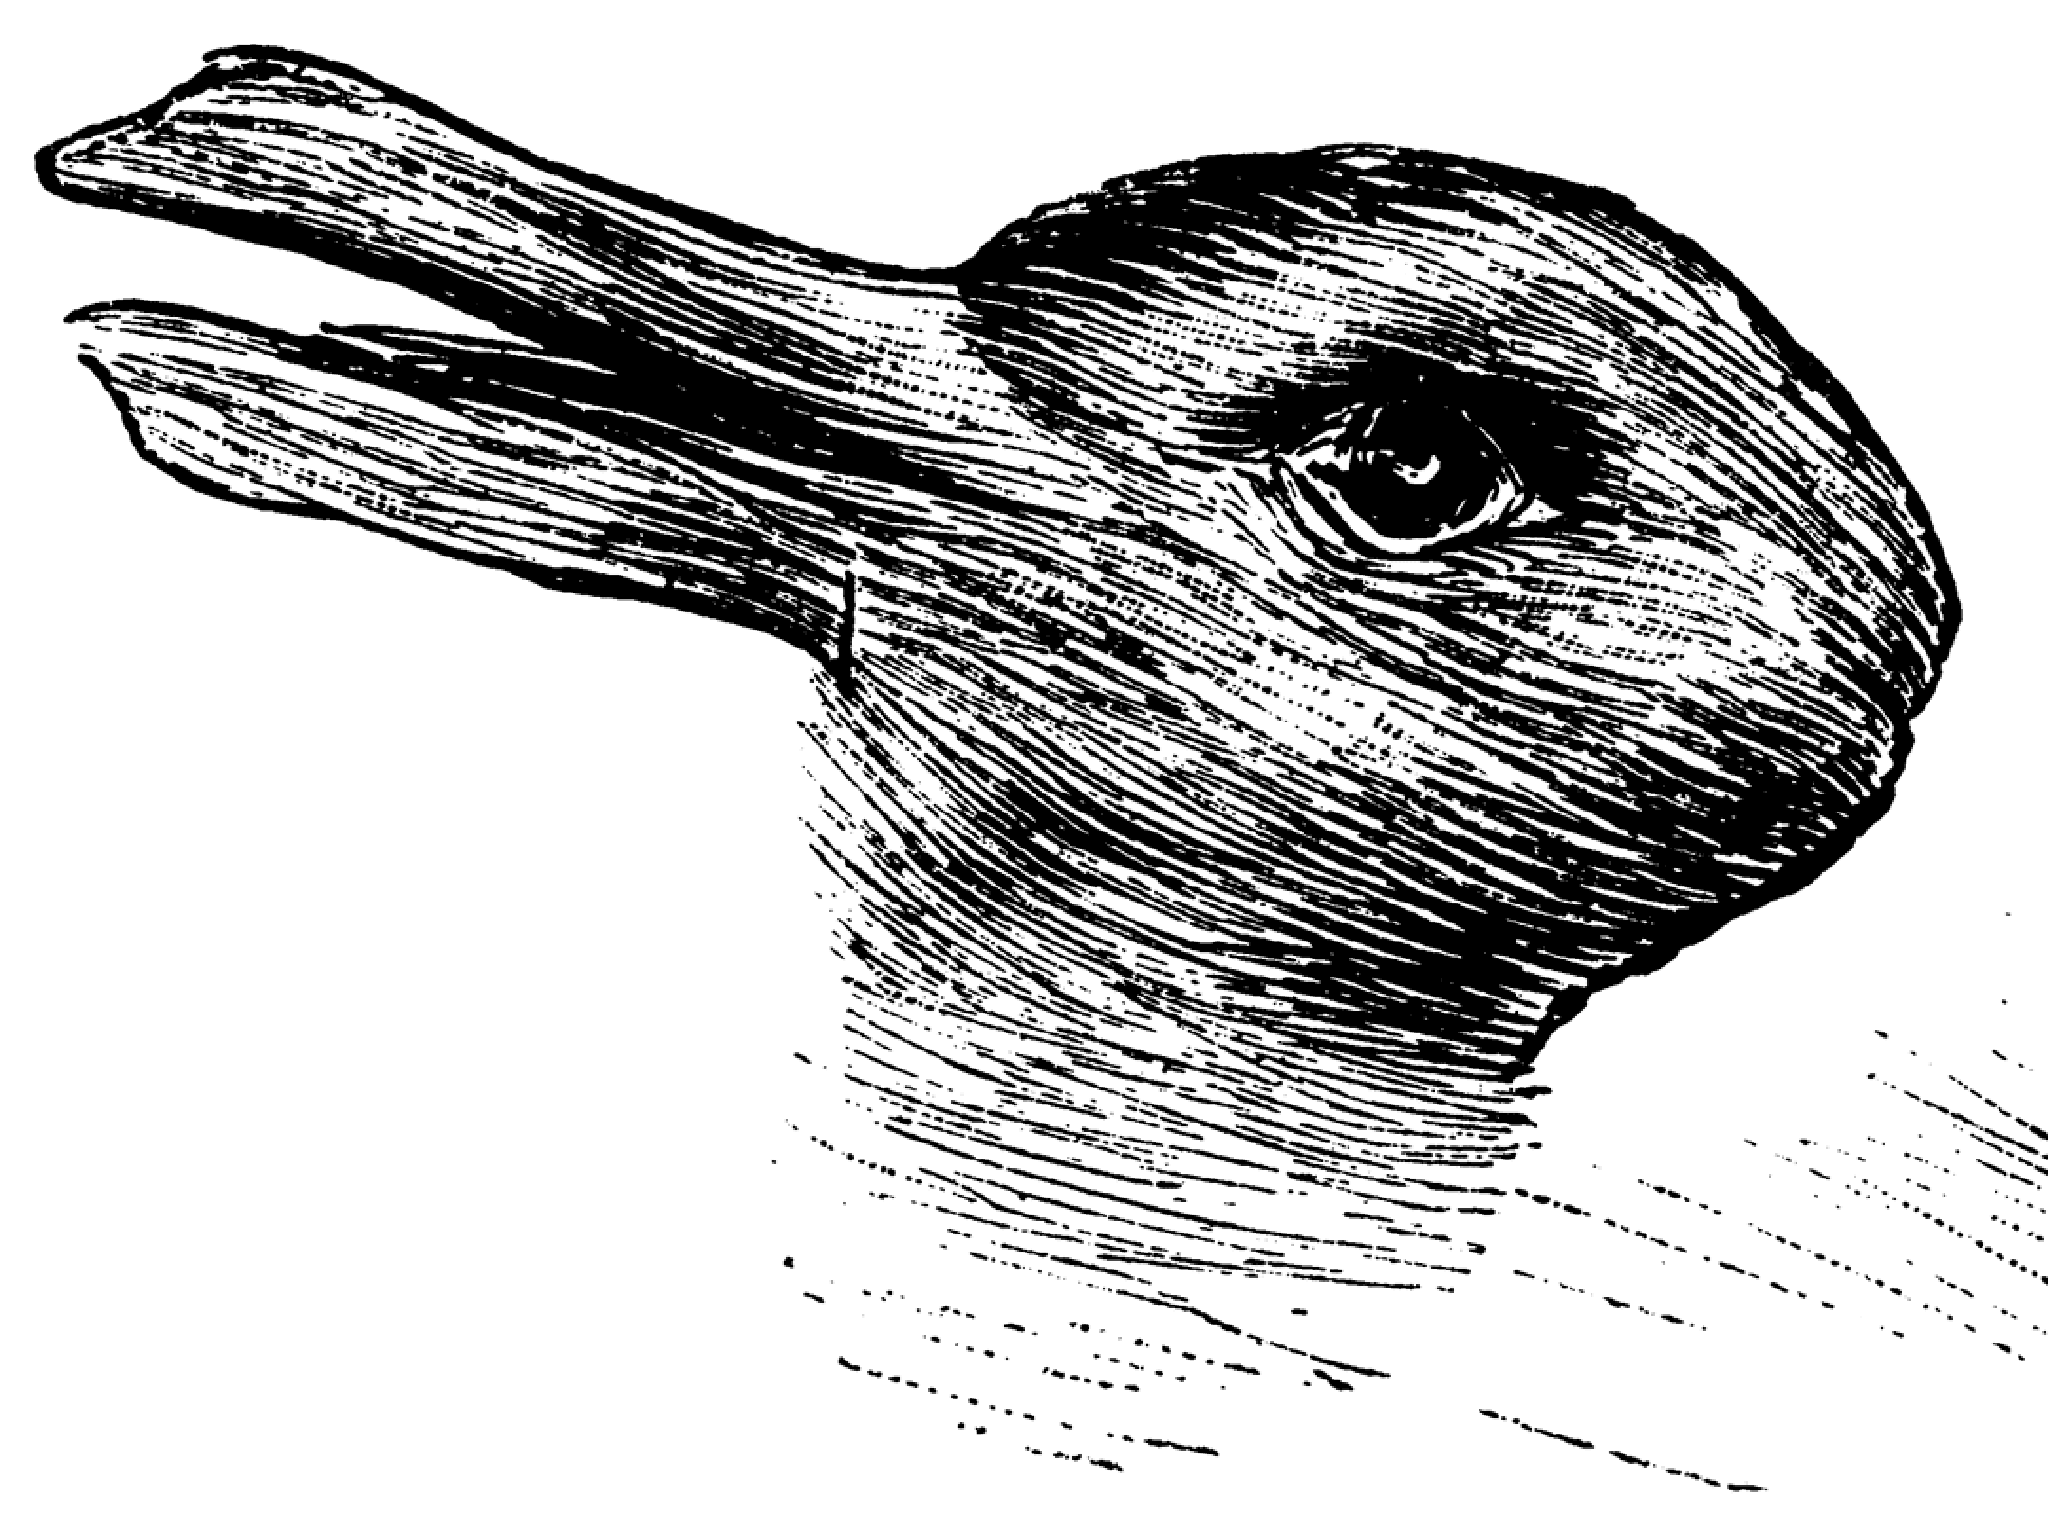 Duck or rabbit? 100-year-old optical illusion by Joseph Jastrow.